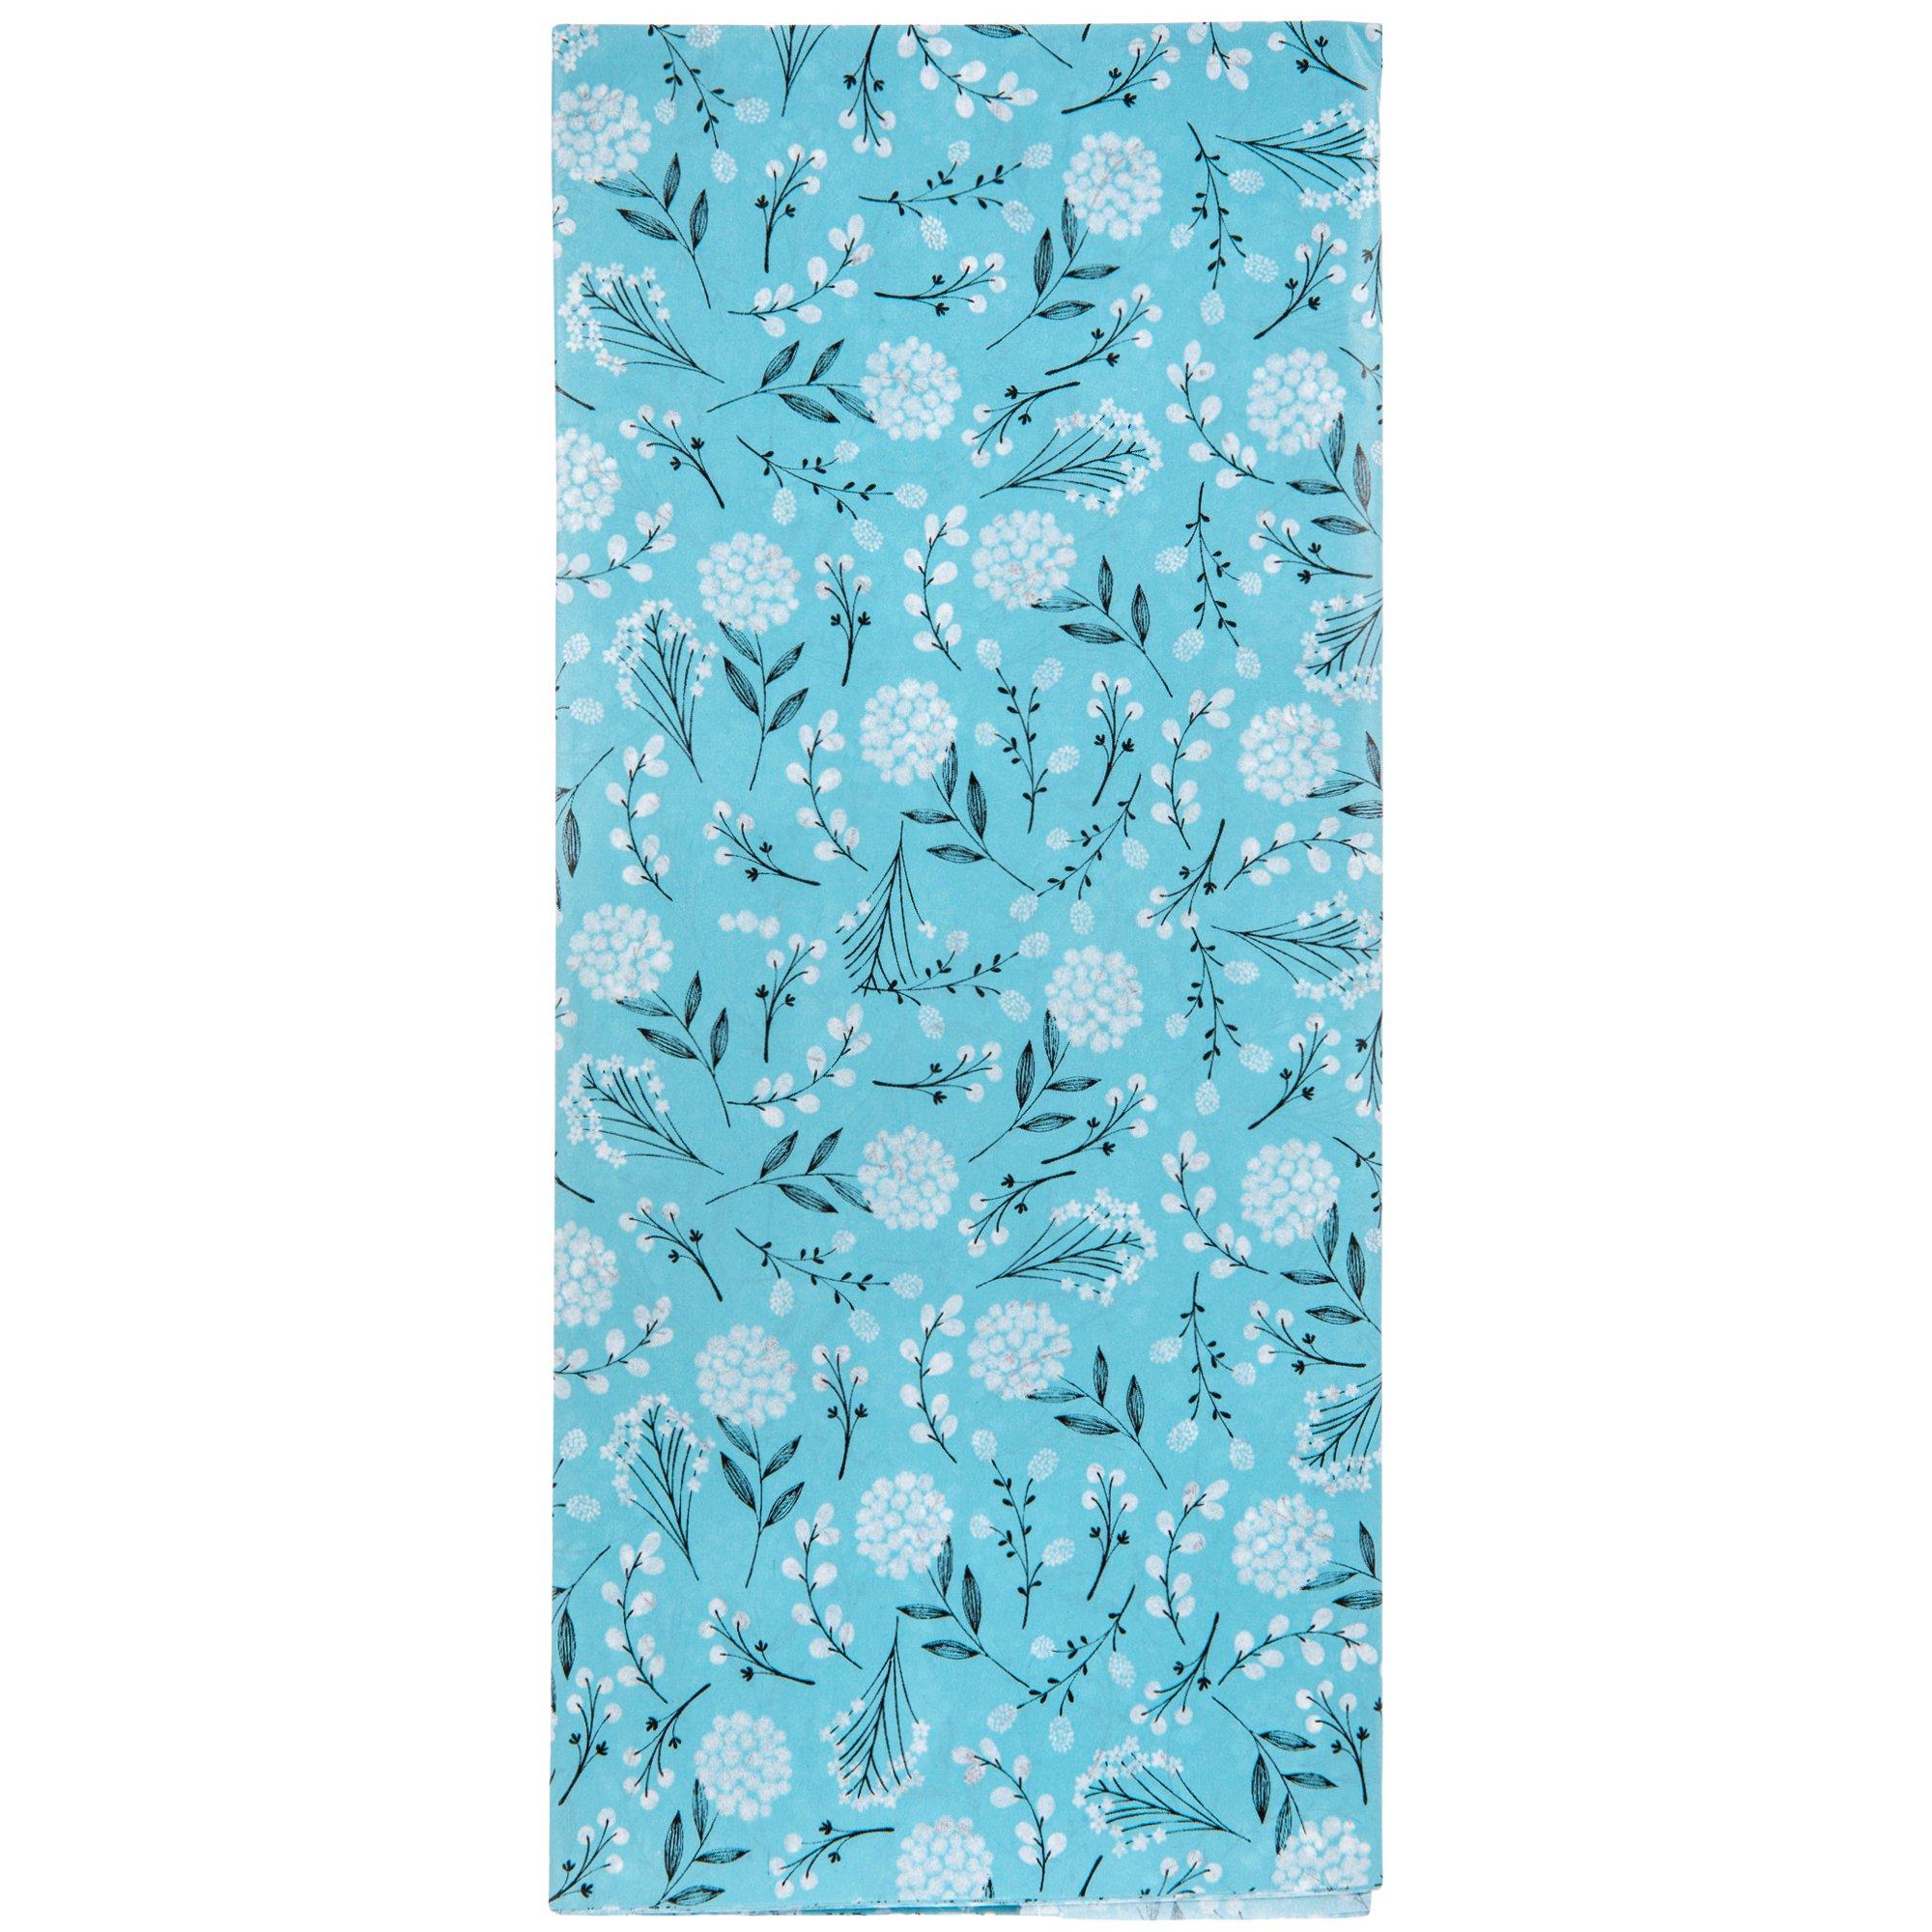 Blue Floral Tissue Wrapping Paper / Gift Tissue Paper / Floral